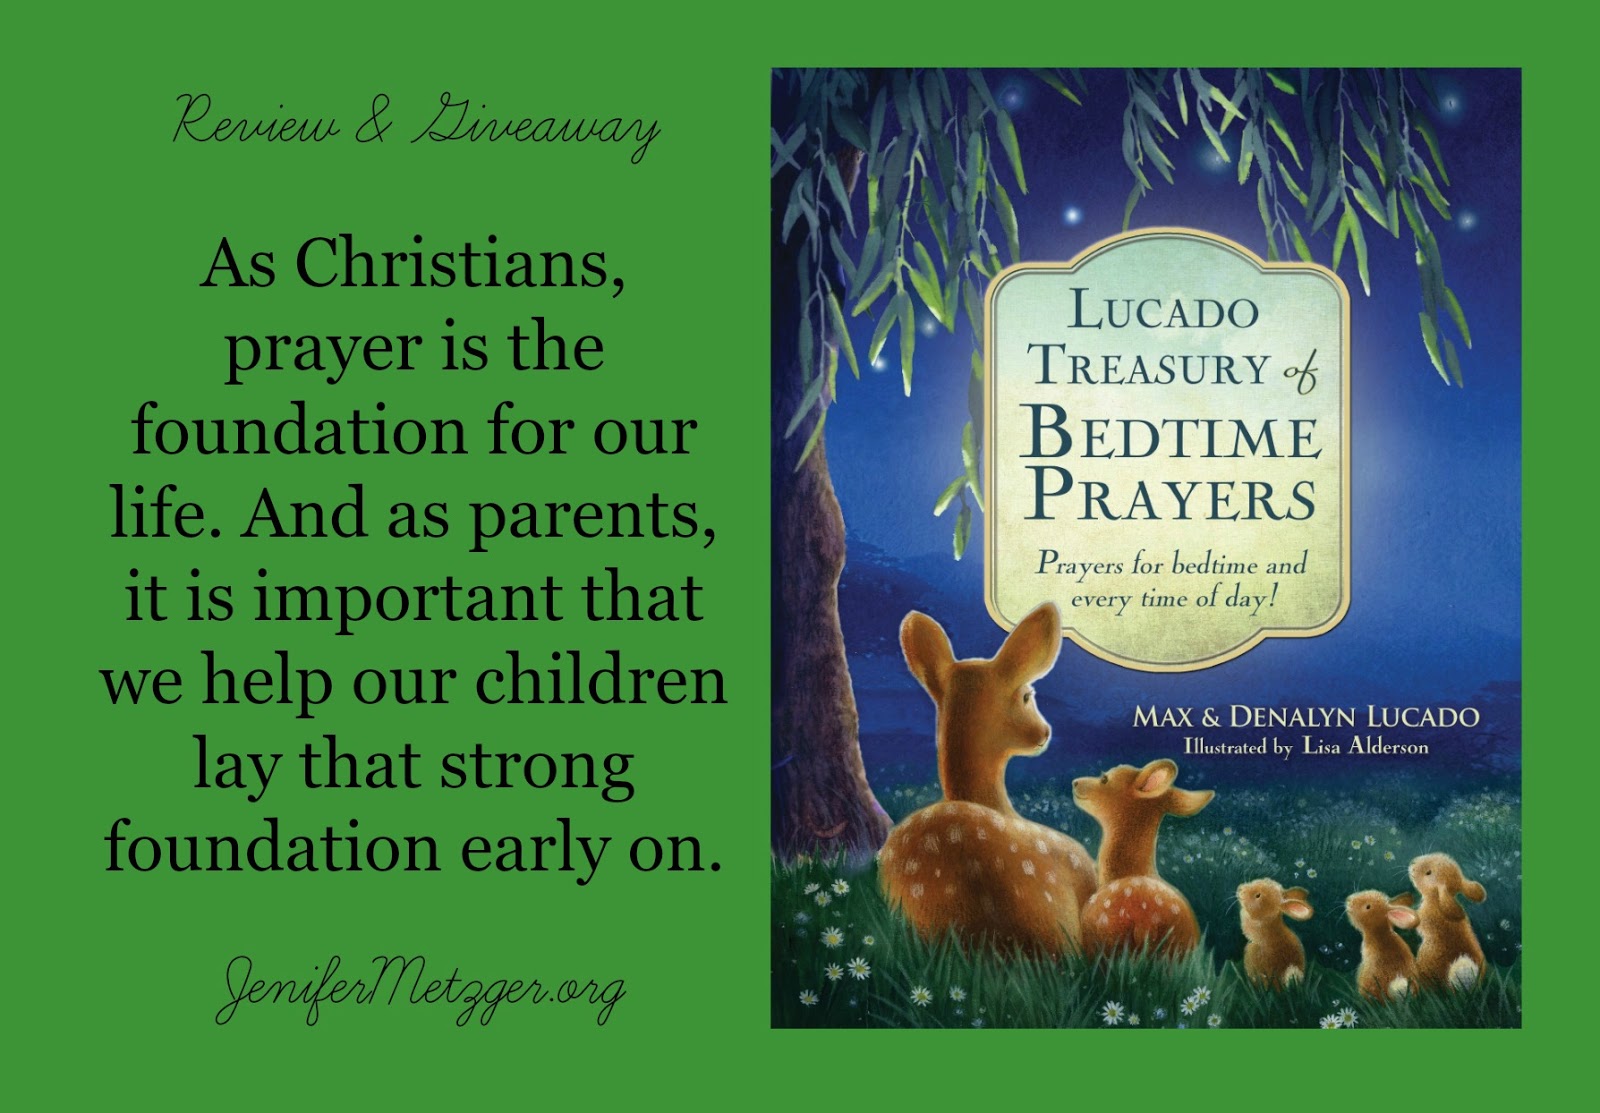 #Prayer is the foundation for life. #tommymommy #giveaway #childrensbook #parenting 